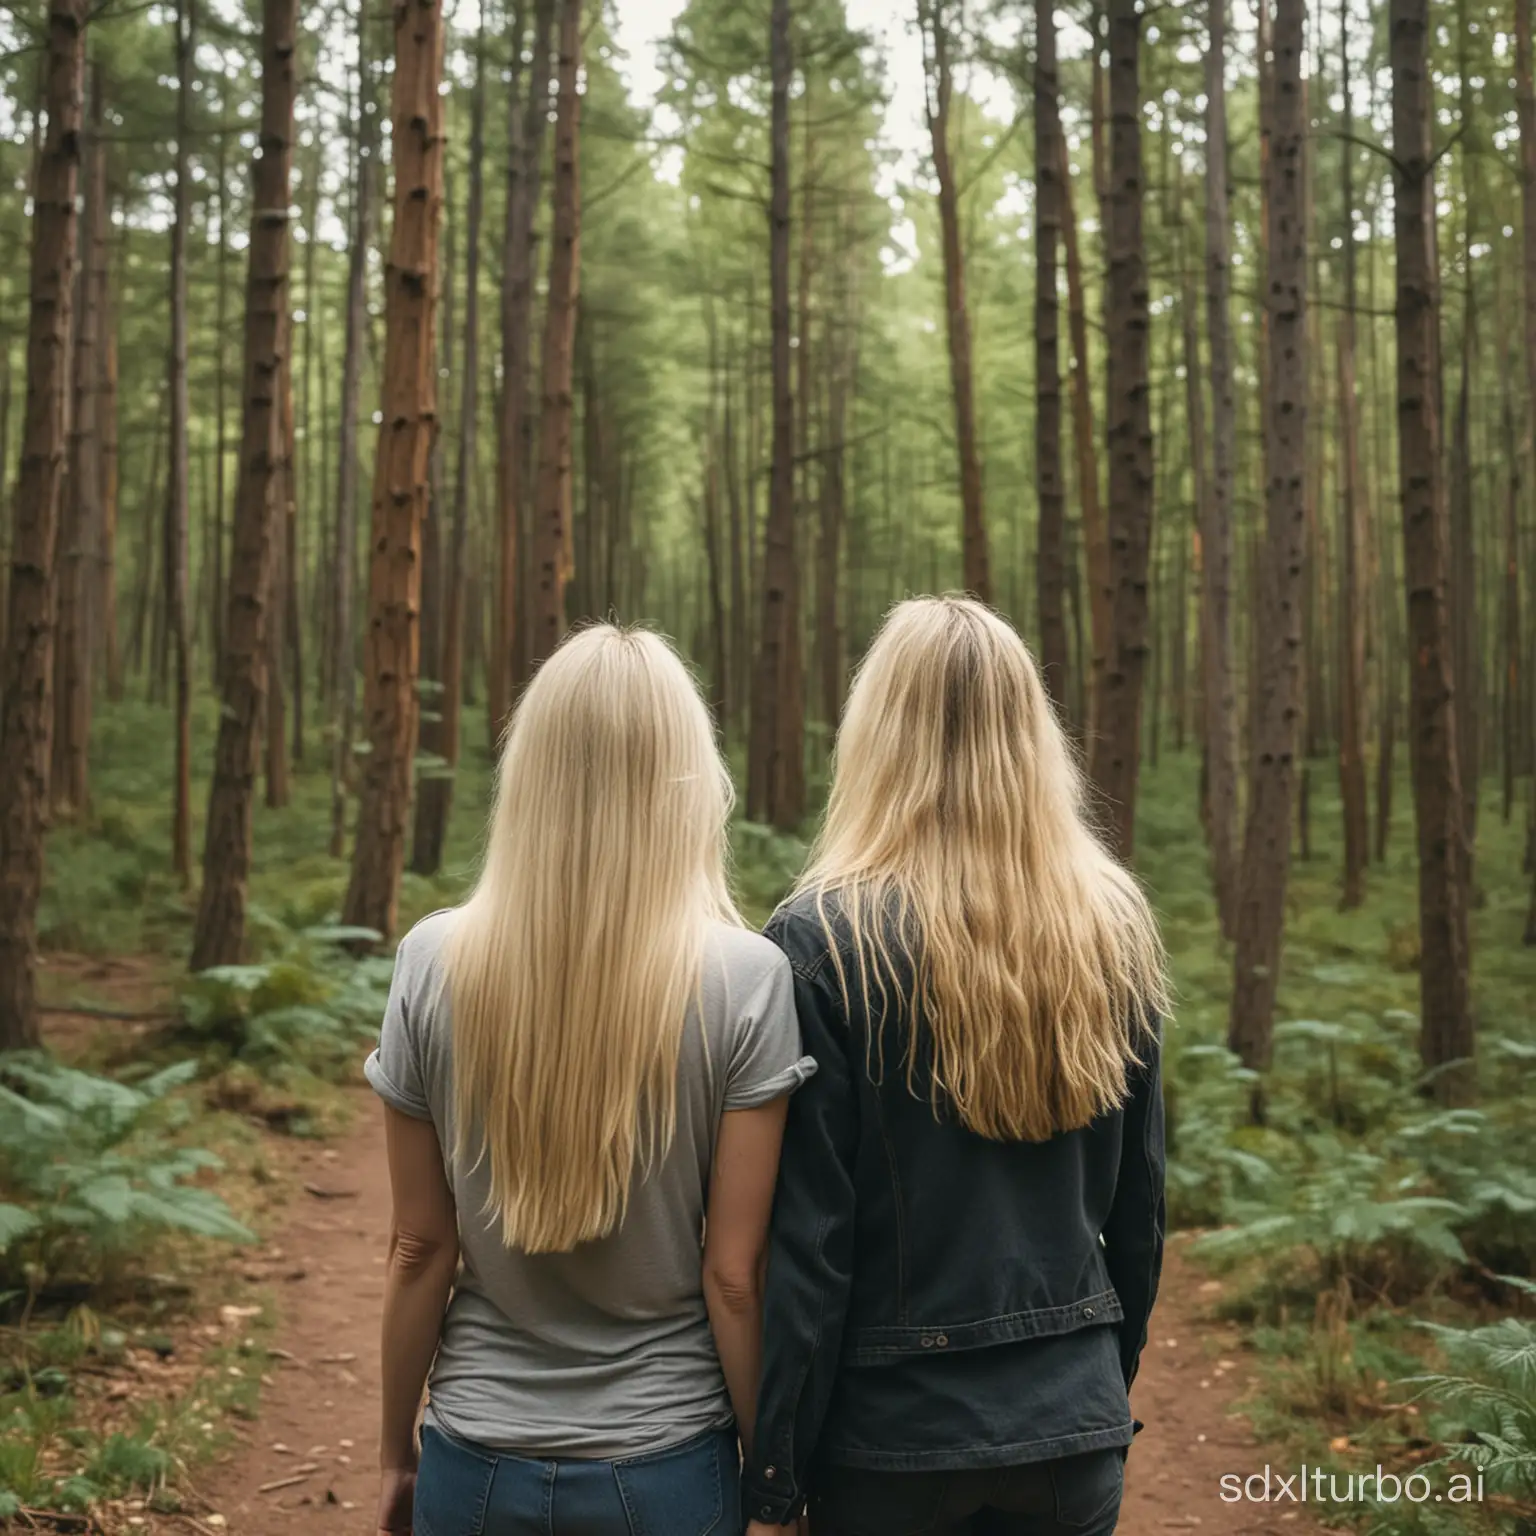 stoner rock band composed of a long haired blonde man and a blonde woman, from behind far in the distance, man is in front, looking forward, in the forest, 90mm